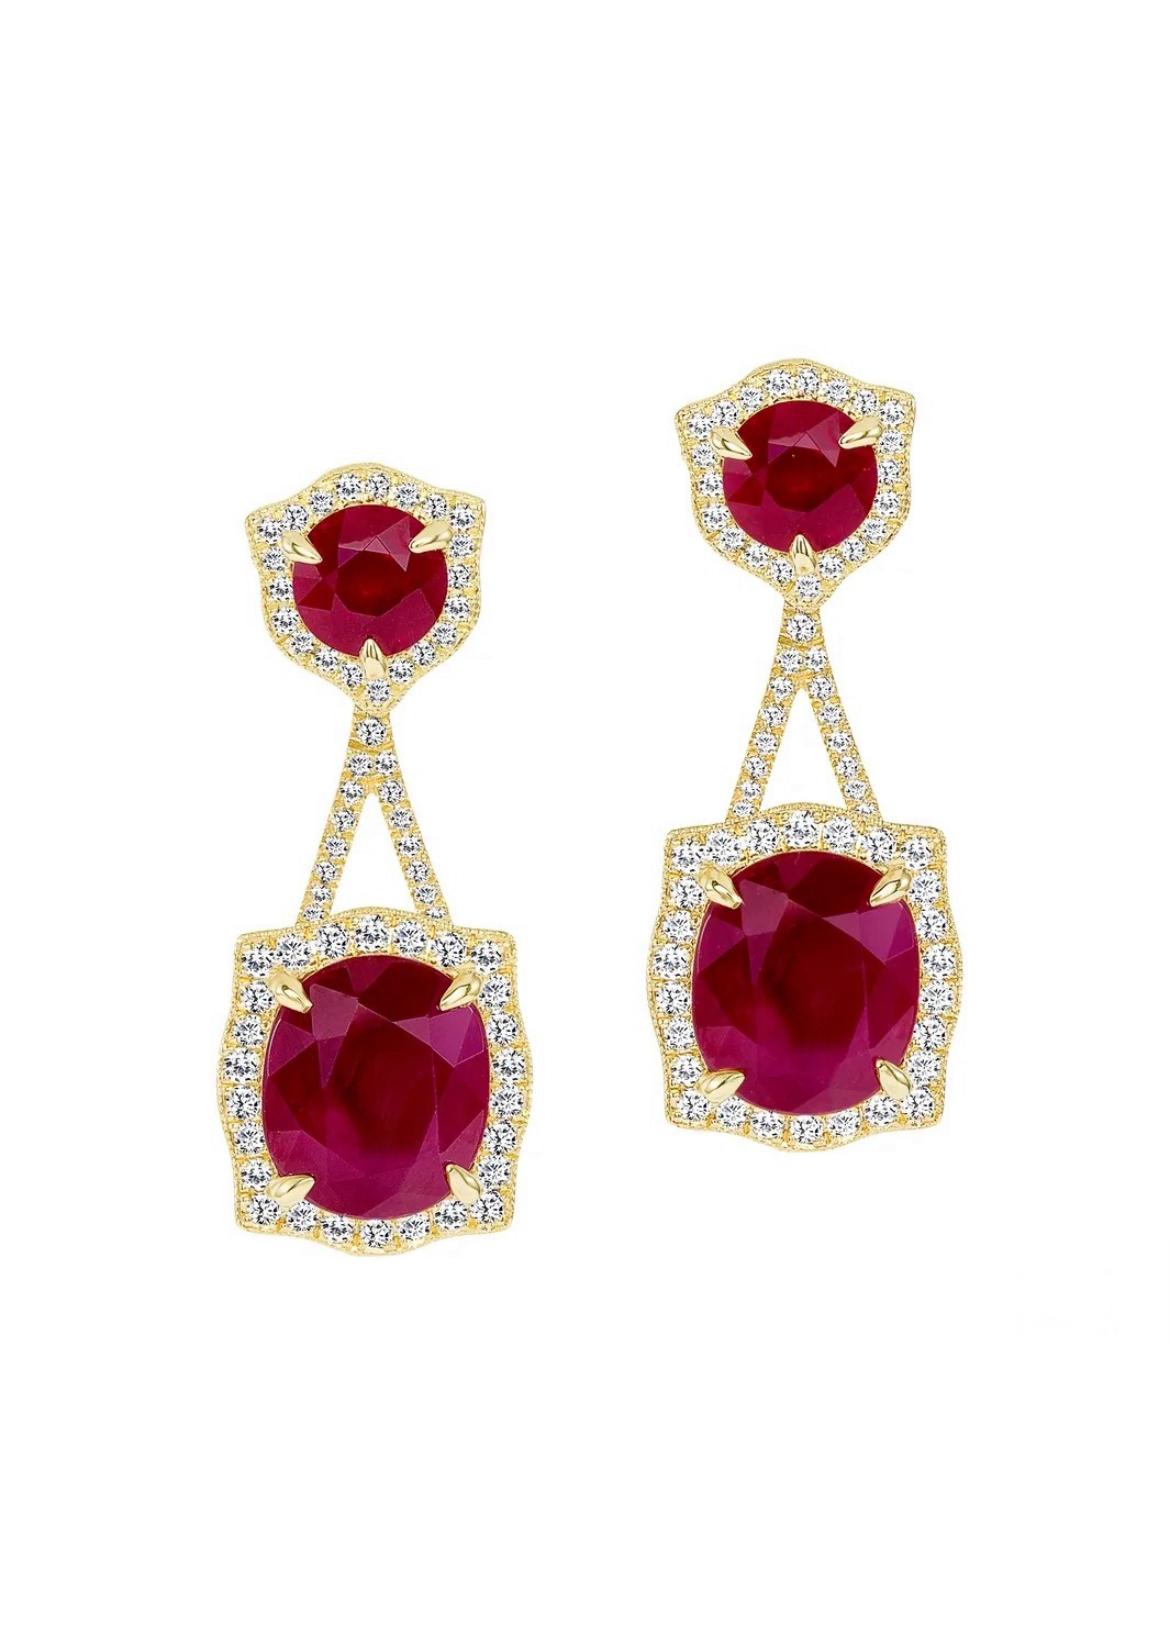 Oval Cut Mozambique Ruby Earrings. 13.22 carats, GIA certified. For Sale